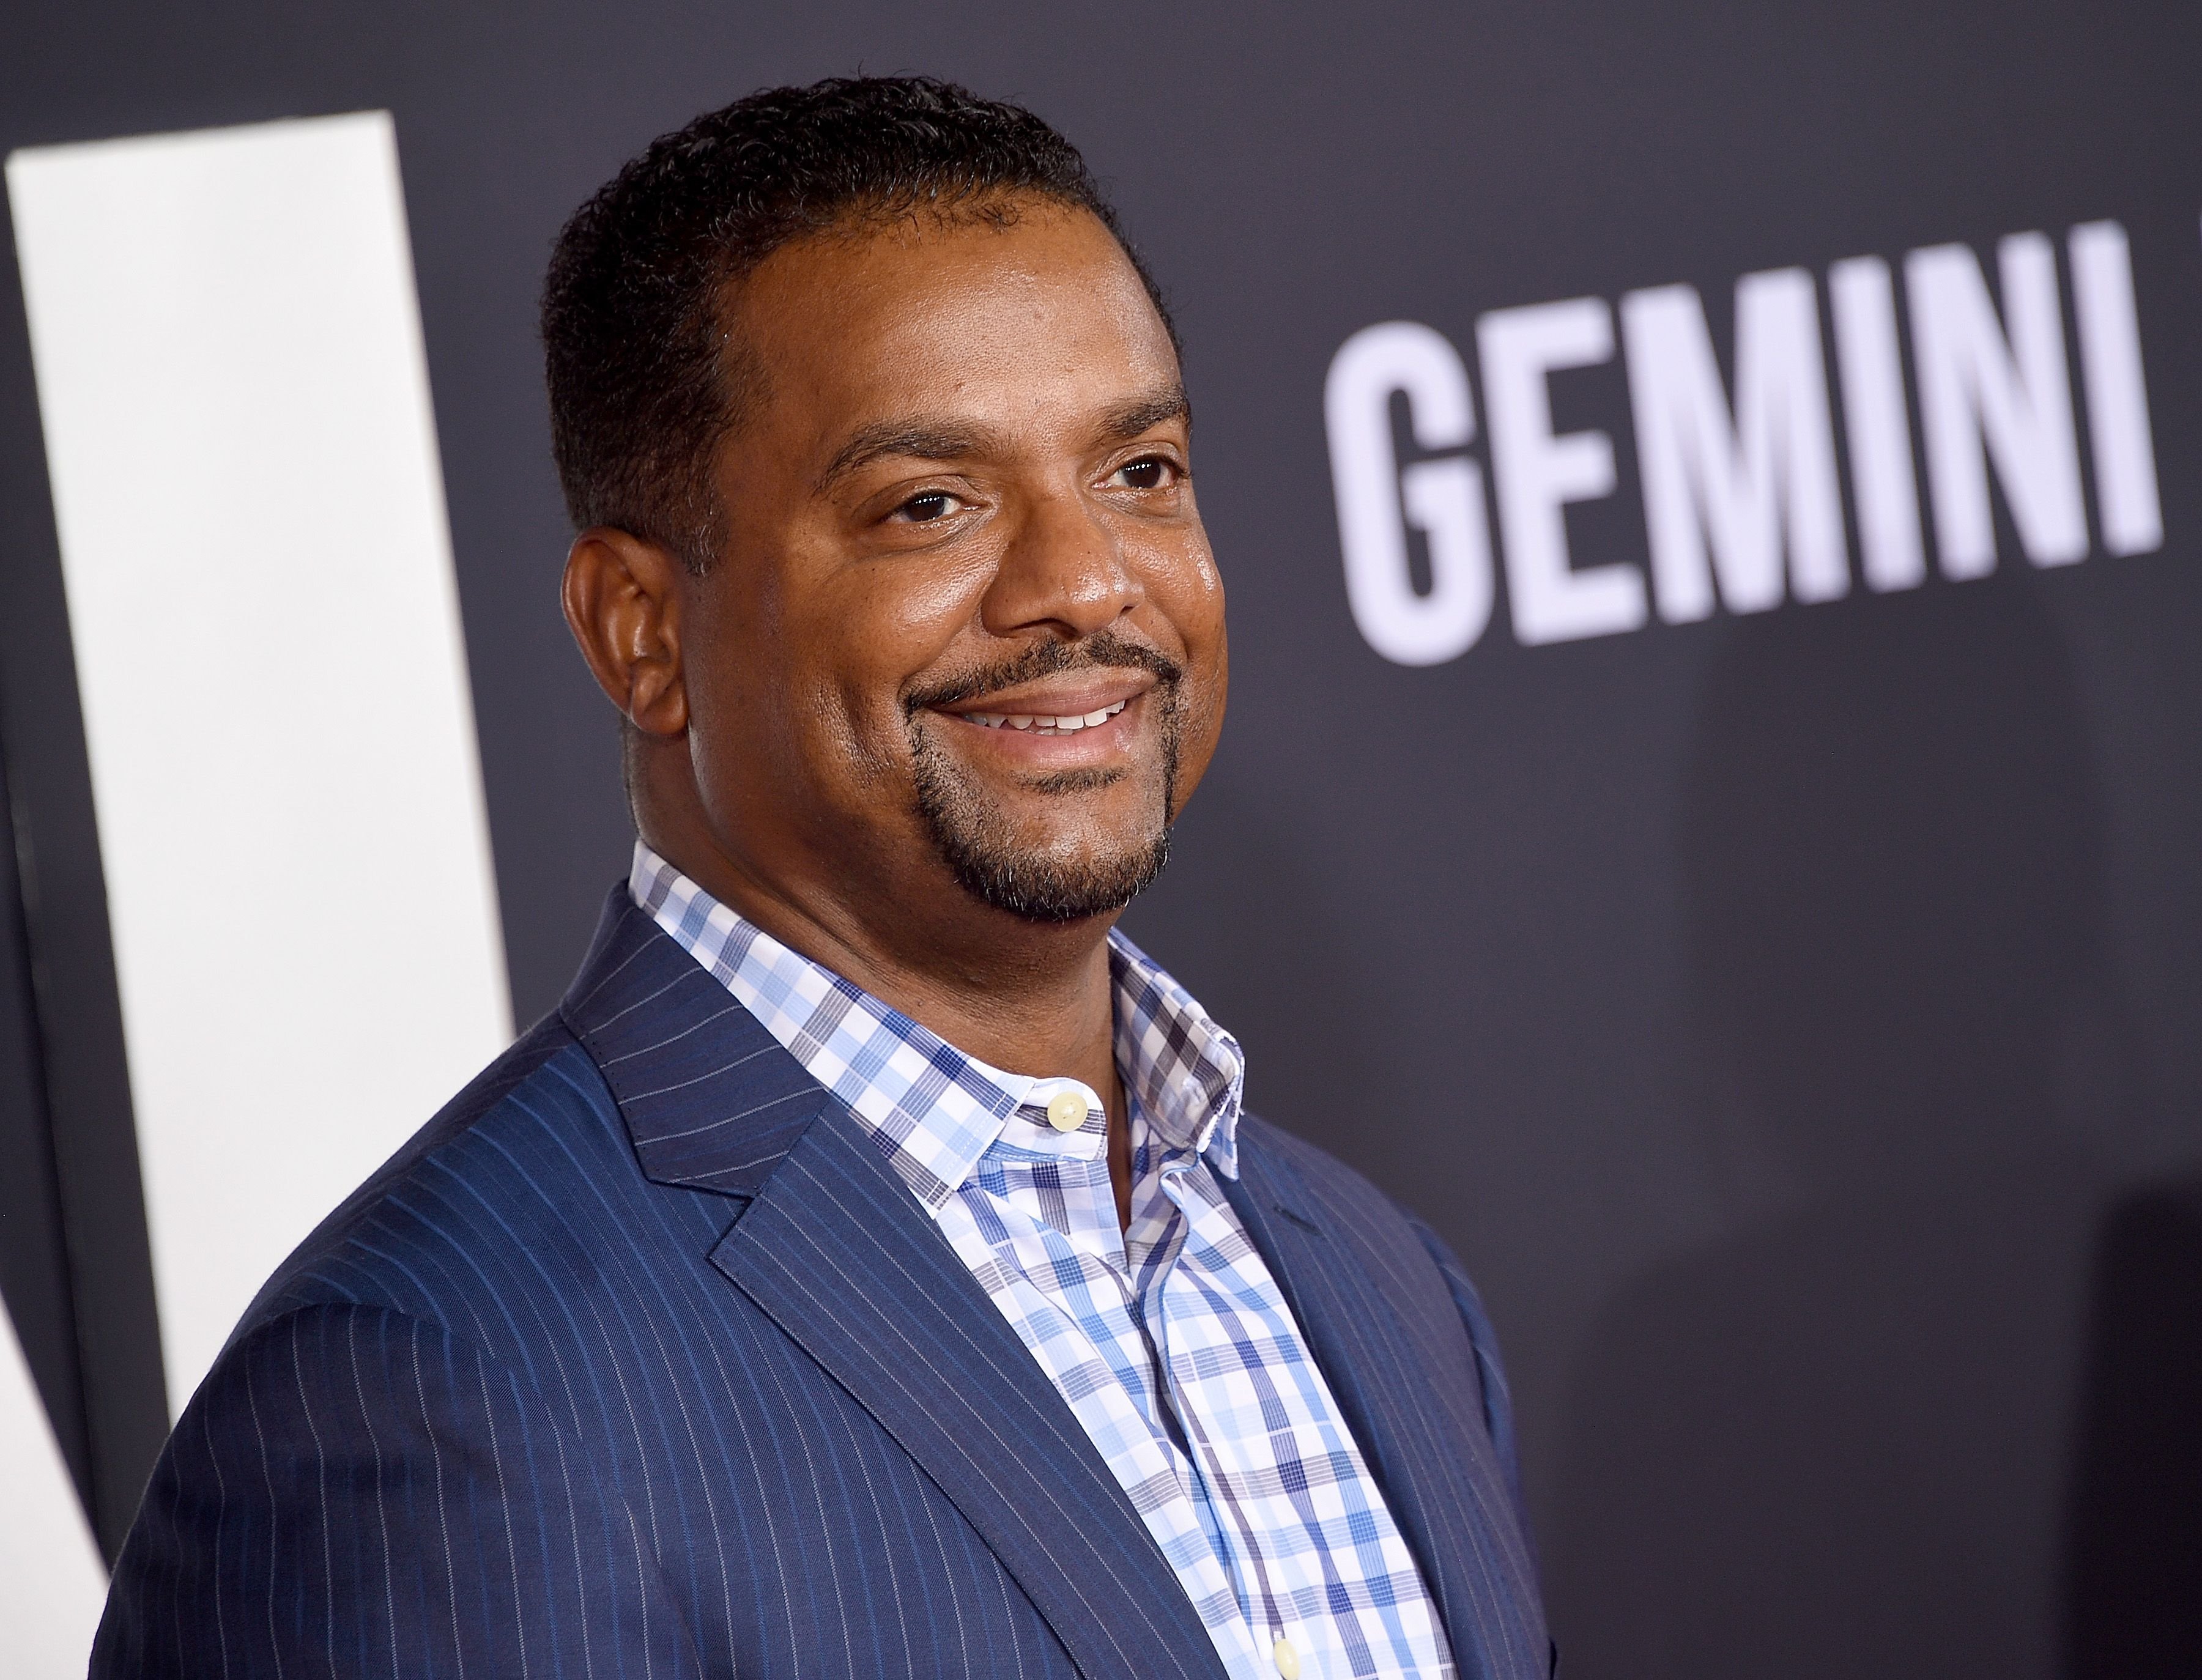 Alfonso Ribeiro at Paramount Pictures' premiere of "Gemini Man" on October 6, 2019 | Photo: Getty Images